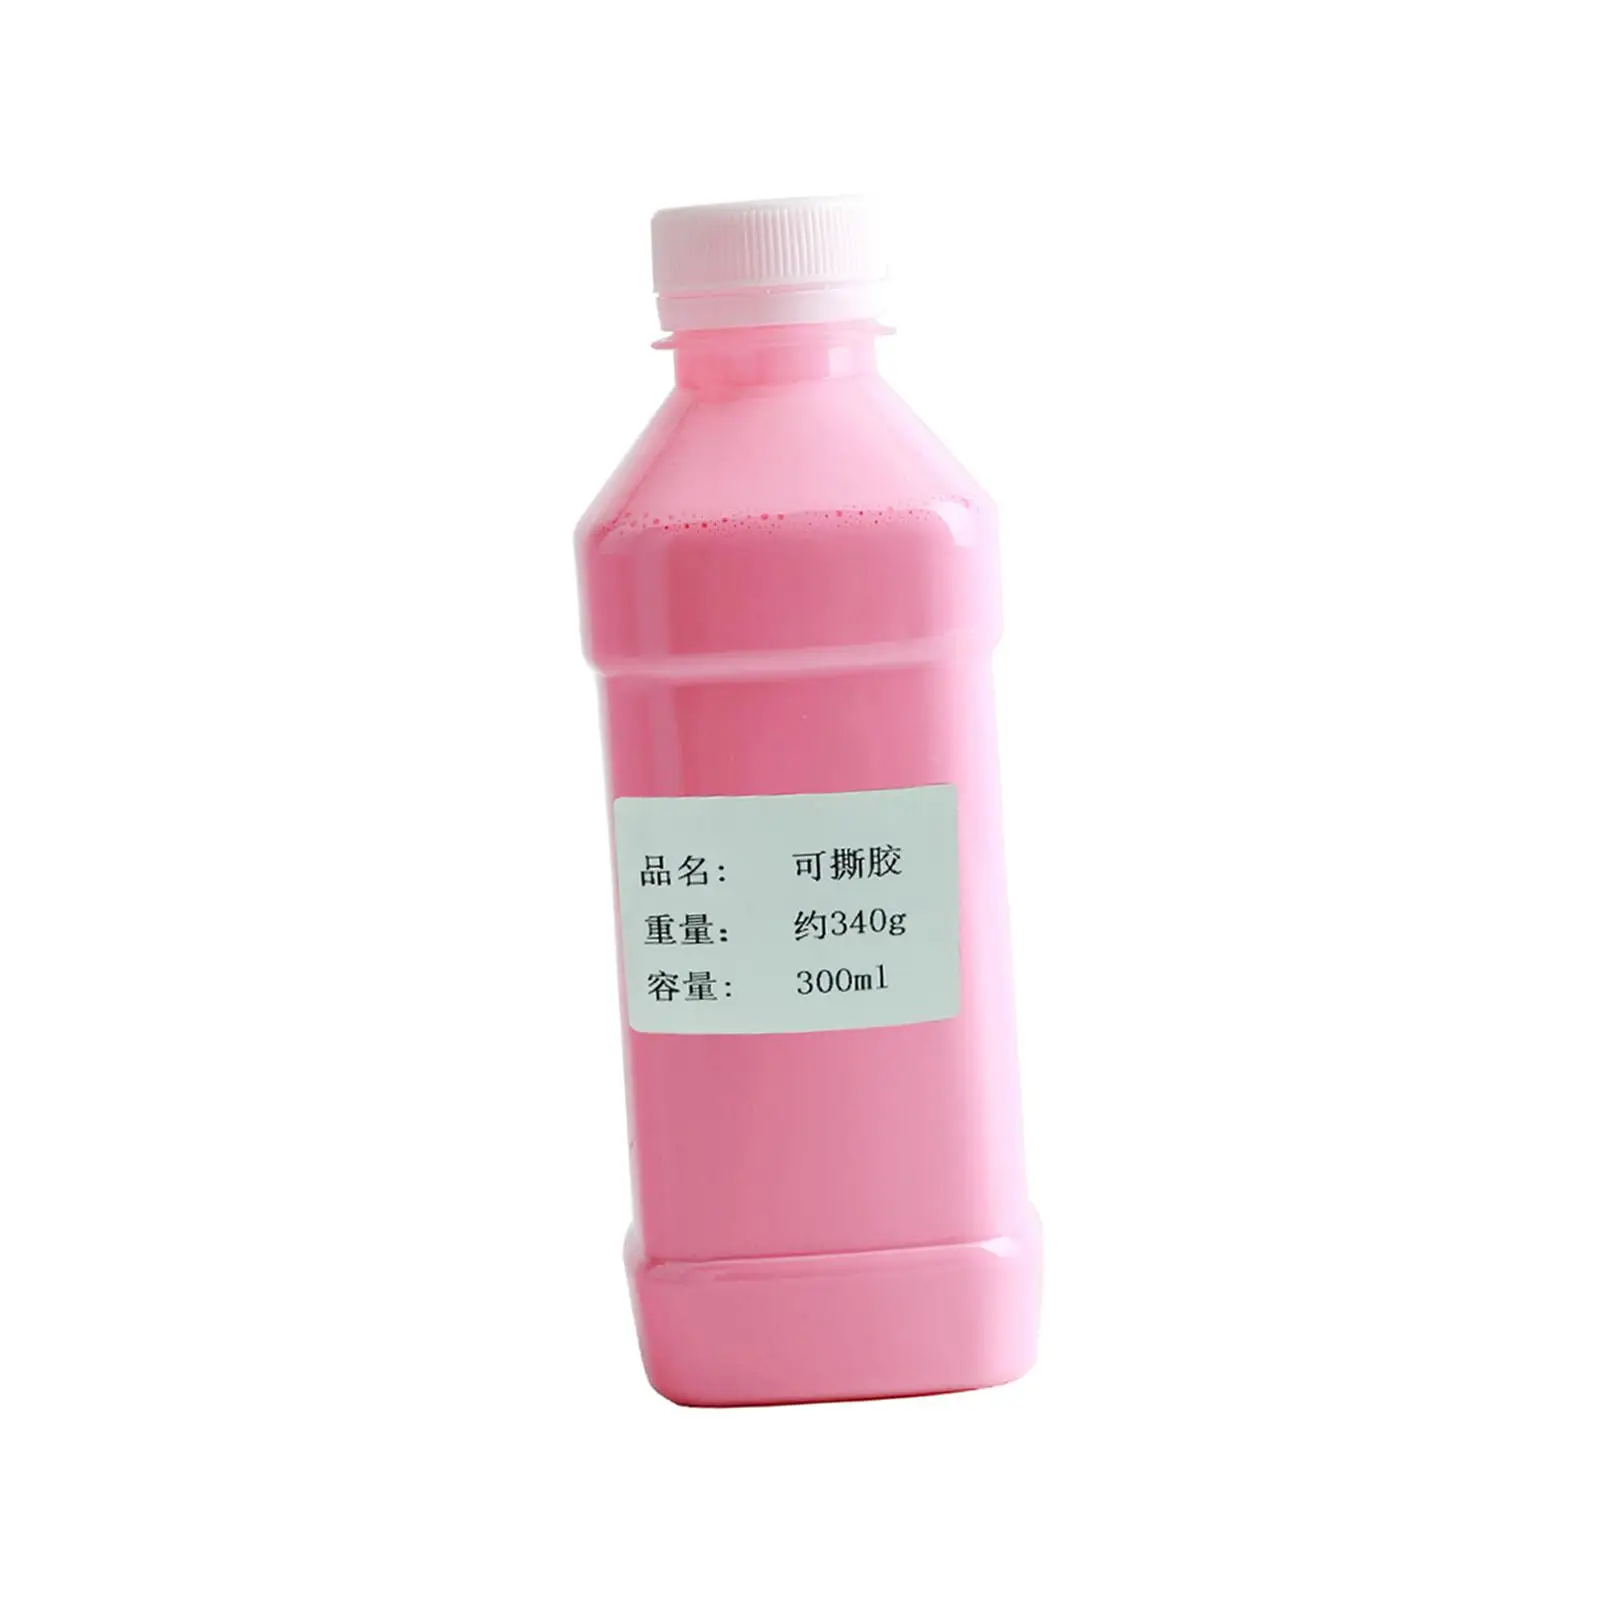 Pottery Masking Glue Can Tear Off Glue Quick Drying 300ml Glue Peelable Glue Tearable Glue for Crafting Art Projects Watercolor